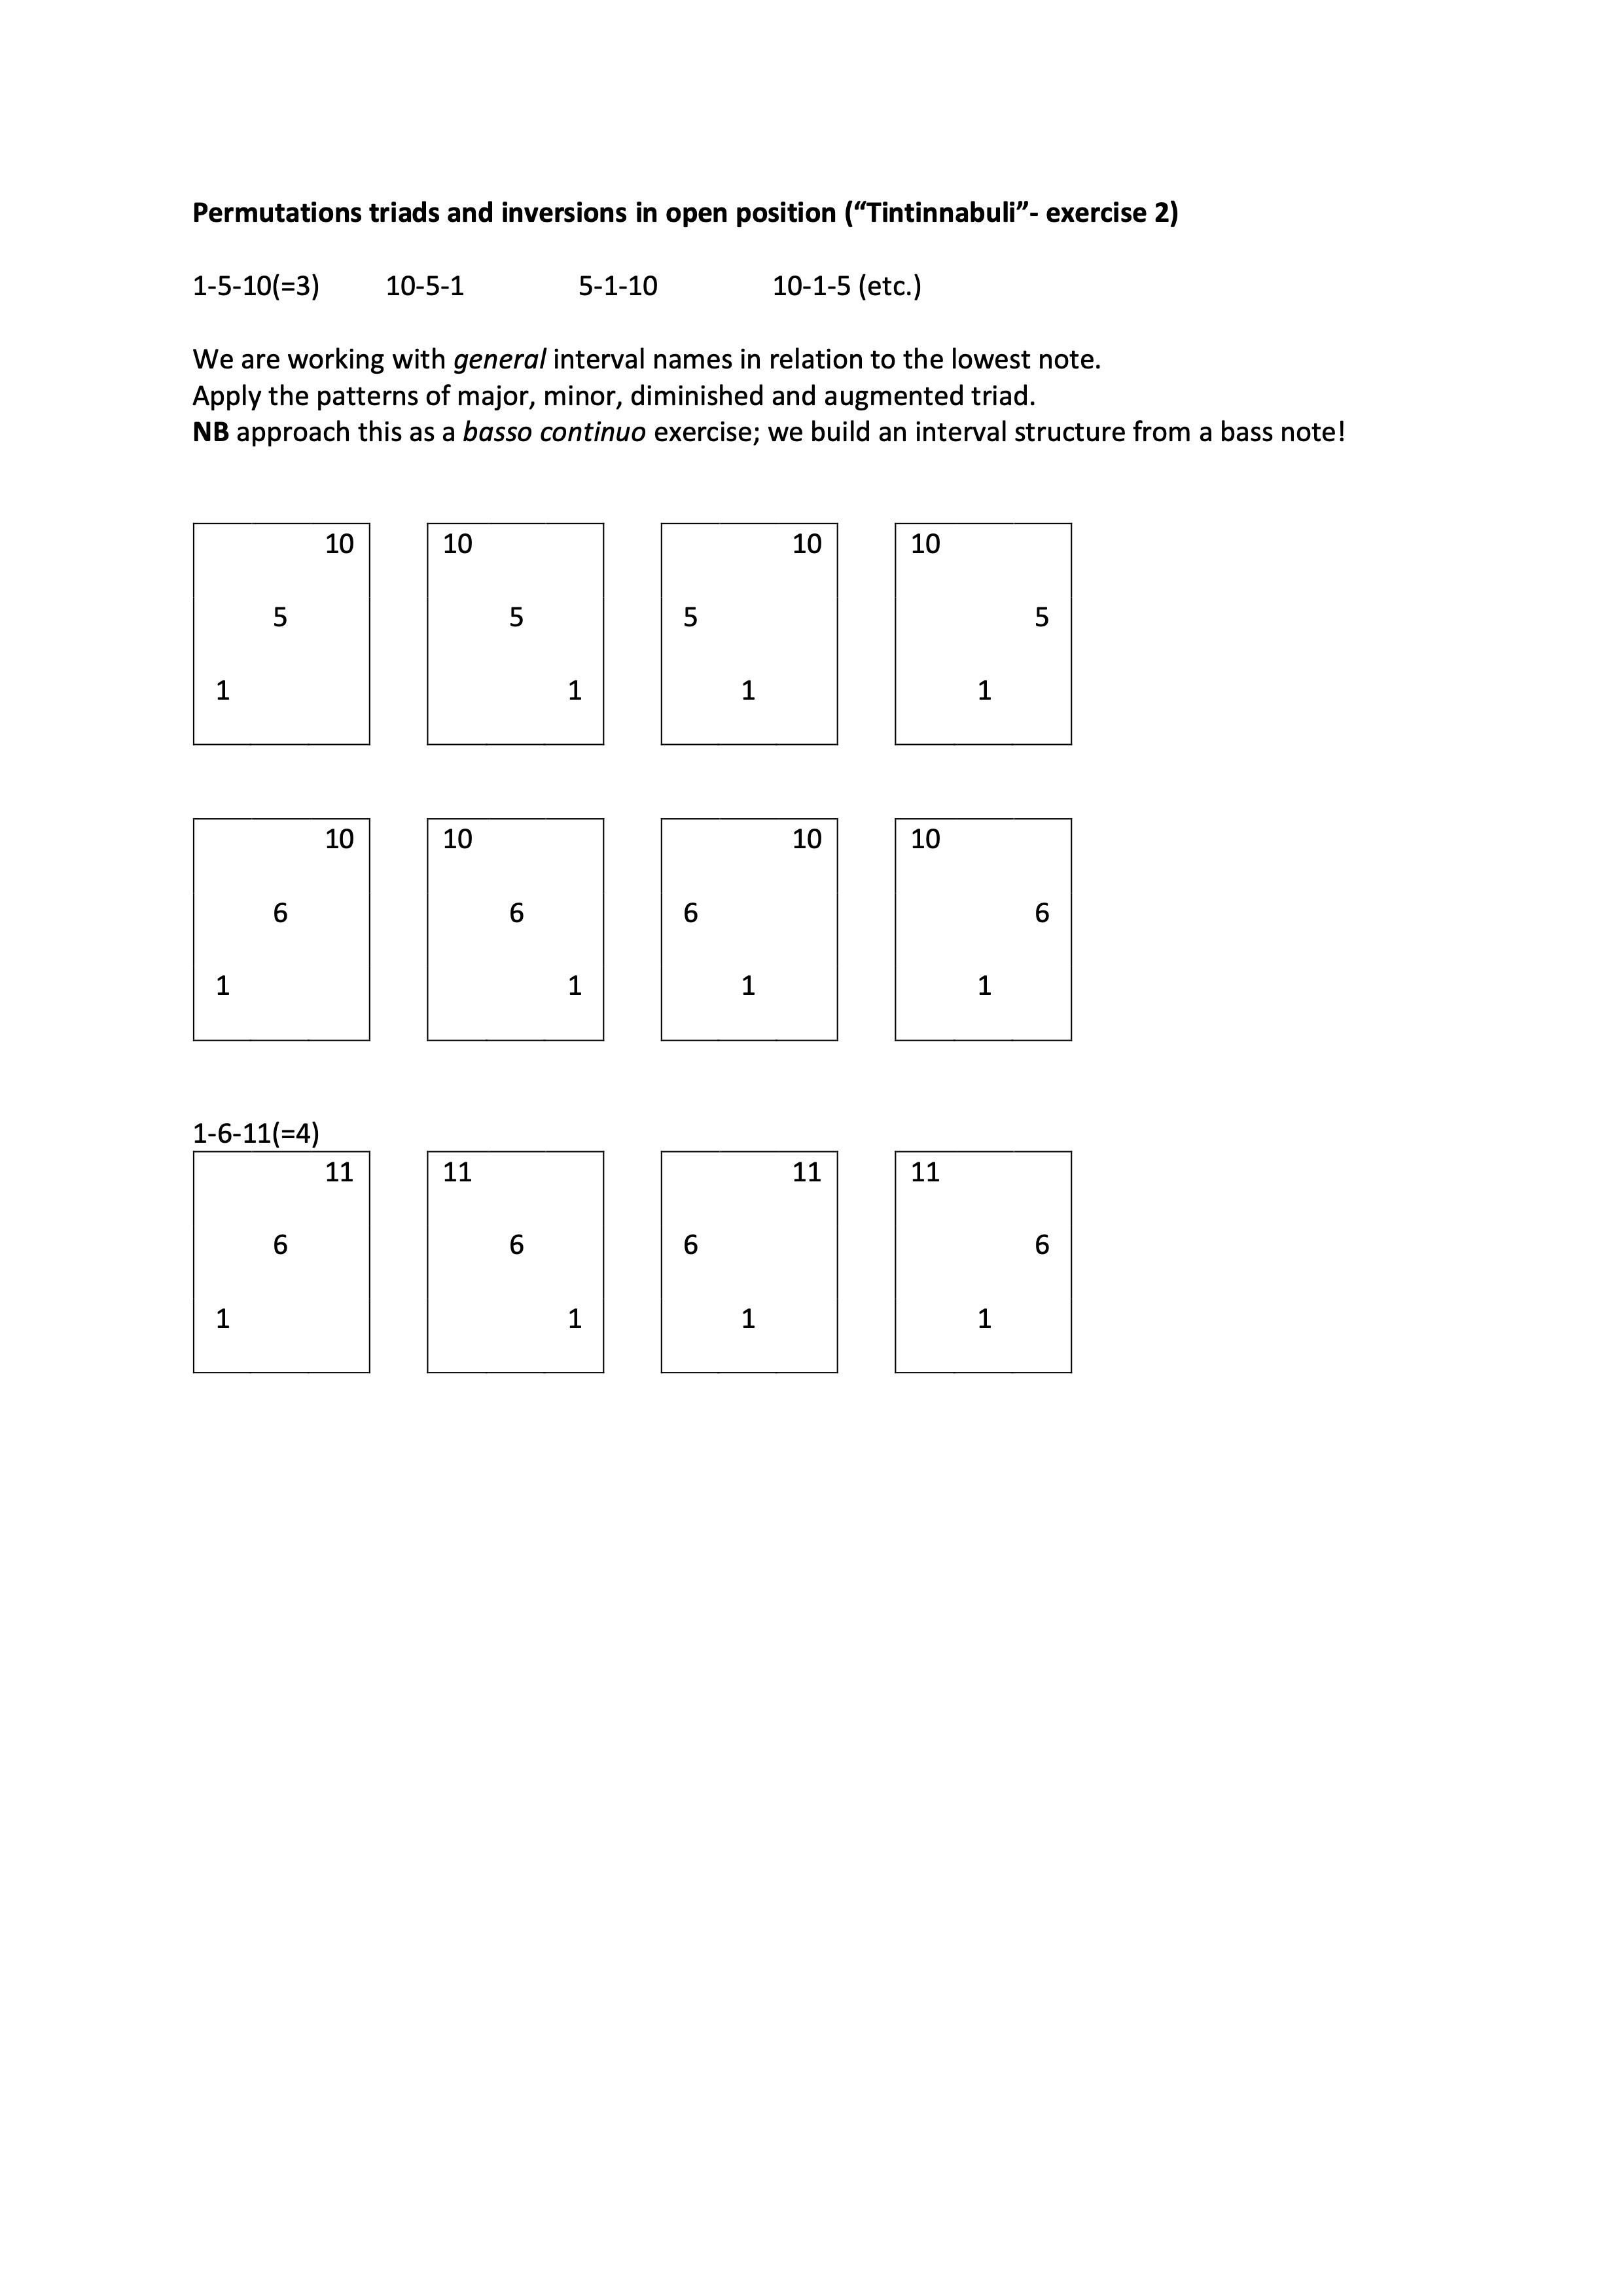 Permutations triads and inversions in open position tintinnabuli exercise 2 word.jpg